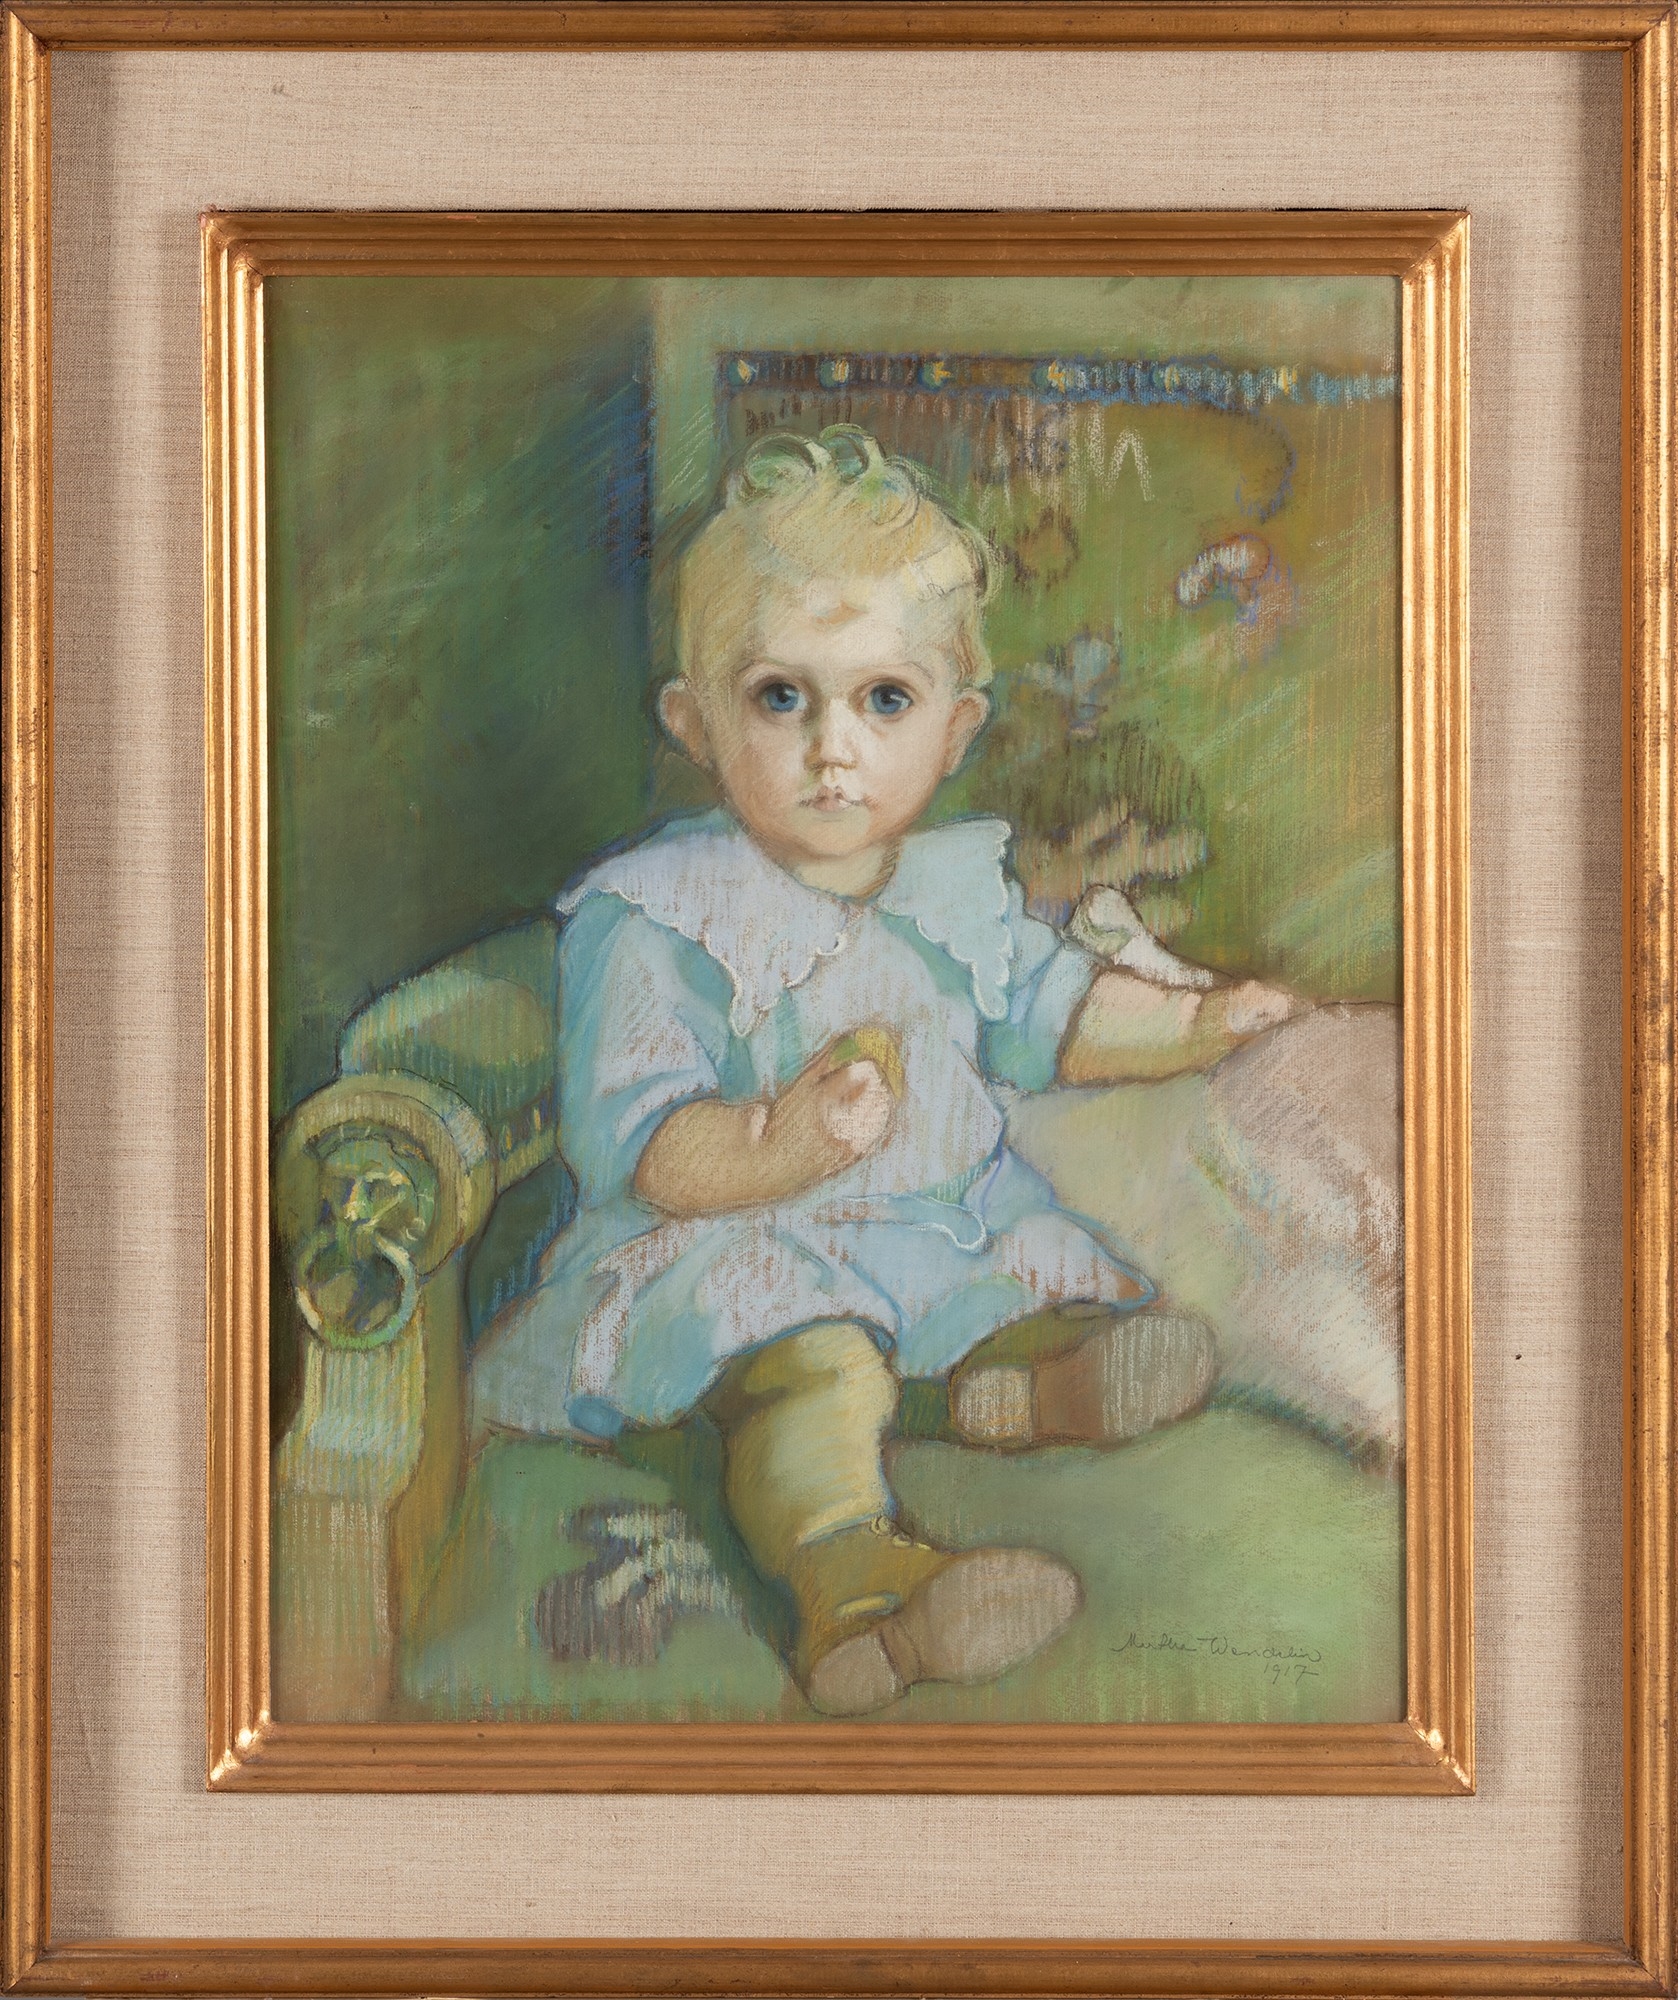 Artwork by Martta Wendelin, A Portrait of a Child, Made of pastel